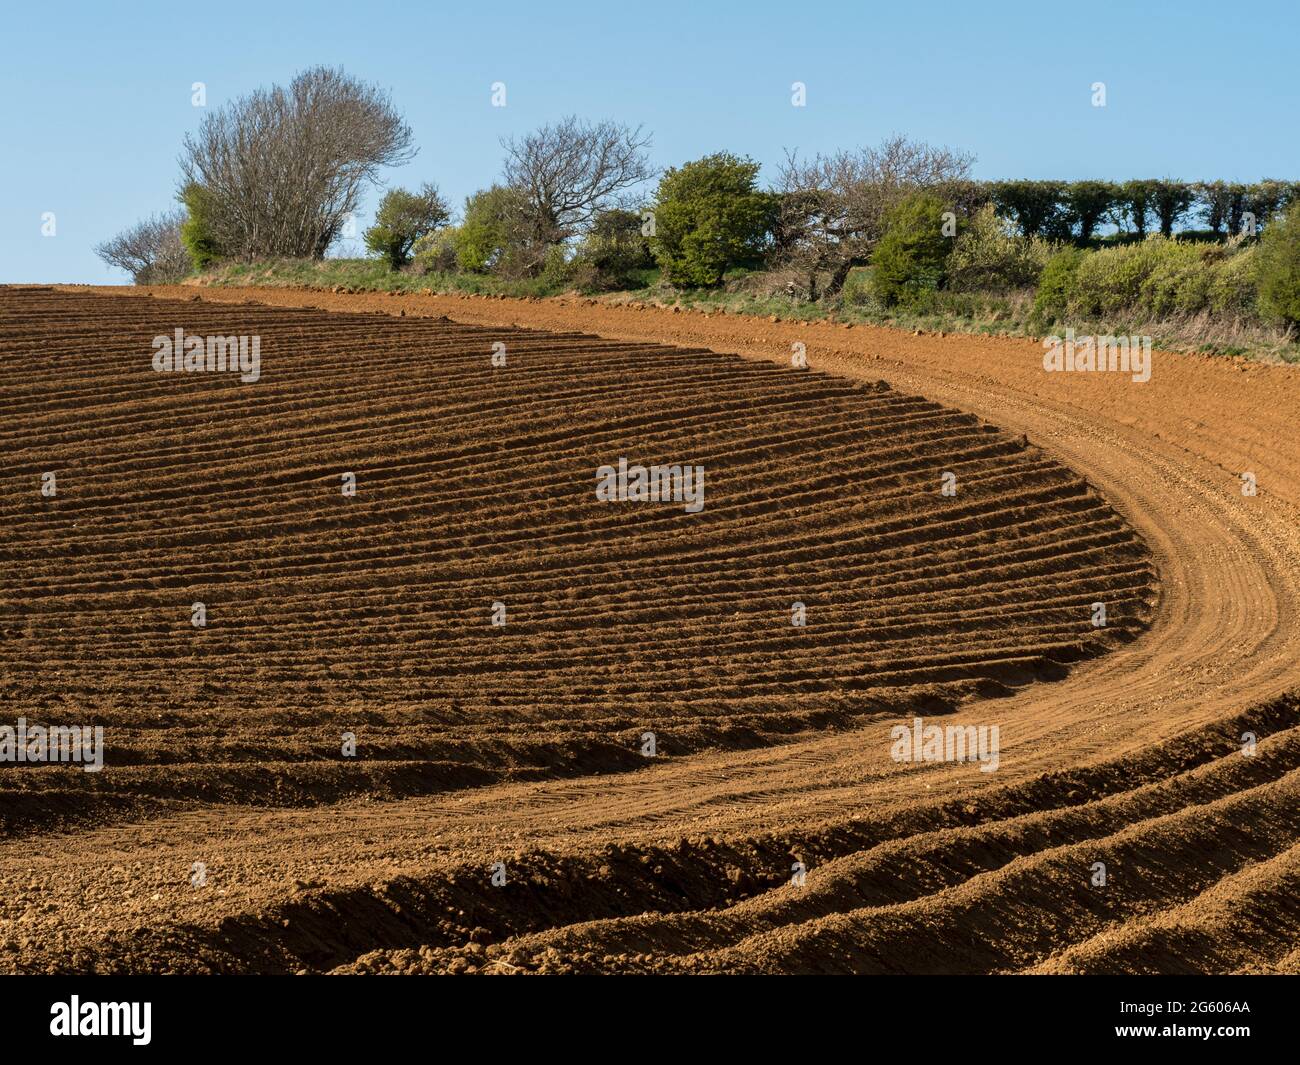 strong geometric shape pattern in curves and lines in a ploughed seeded field at golden hour side hard light under clear blue sky Stock Photo